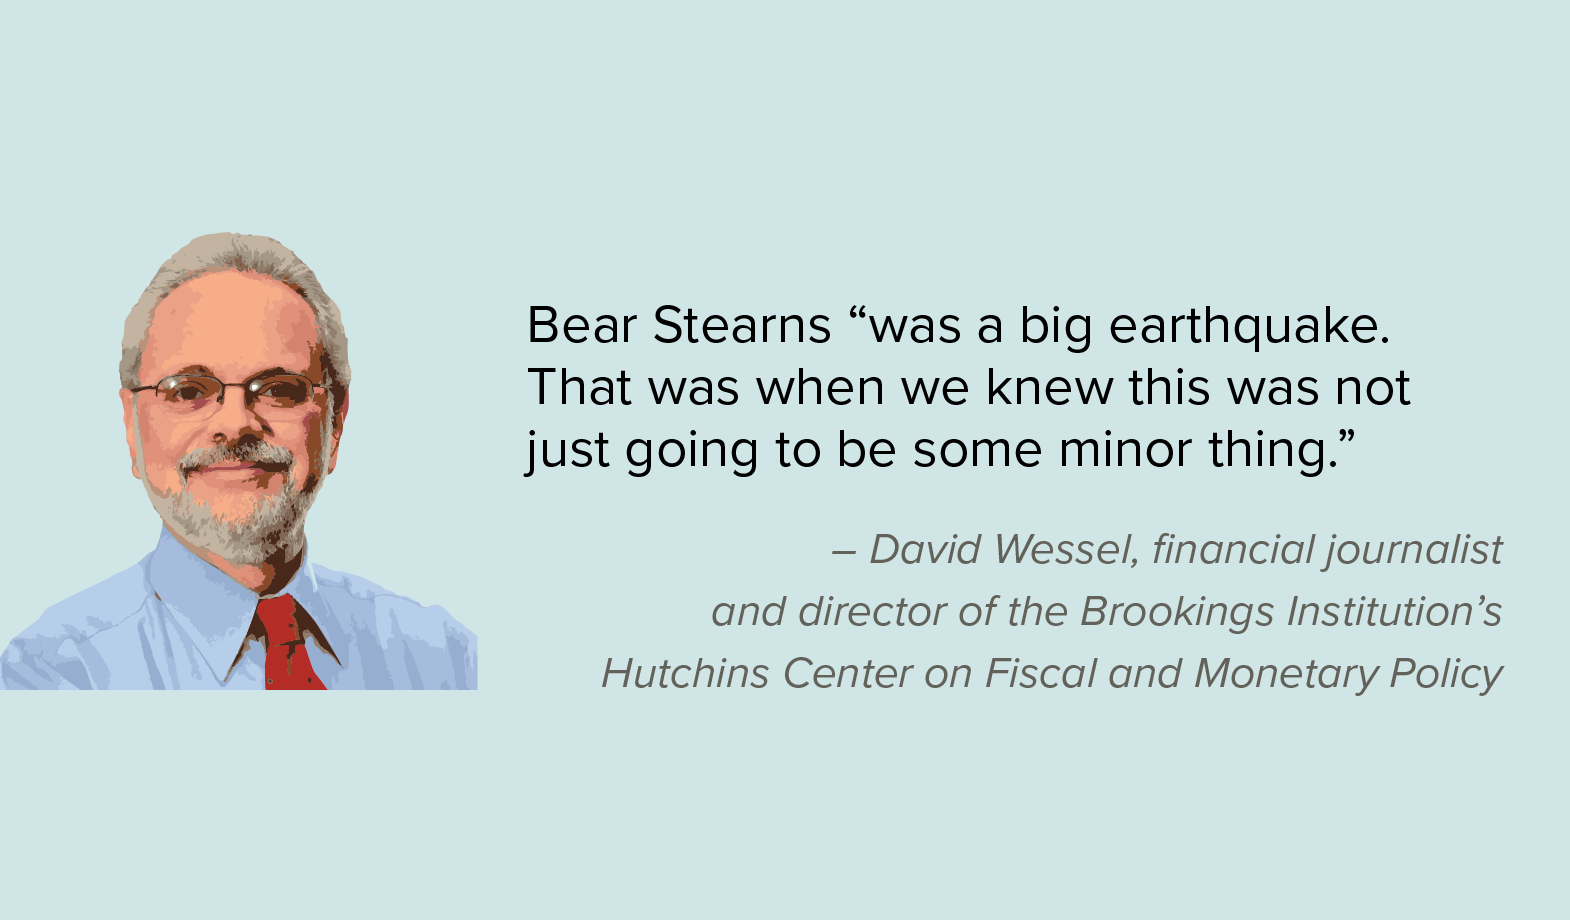 David Wessel: Bear Stearns “was a big earthquake. That was when we knew this was not just going to be some minor thing.“